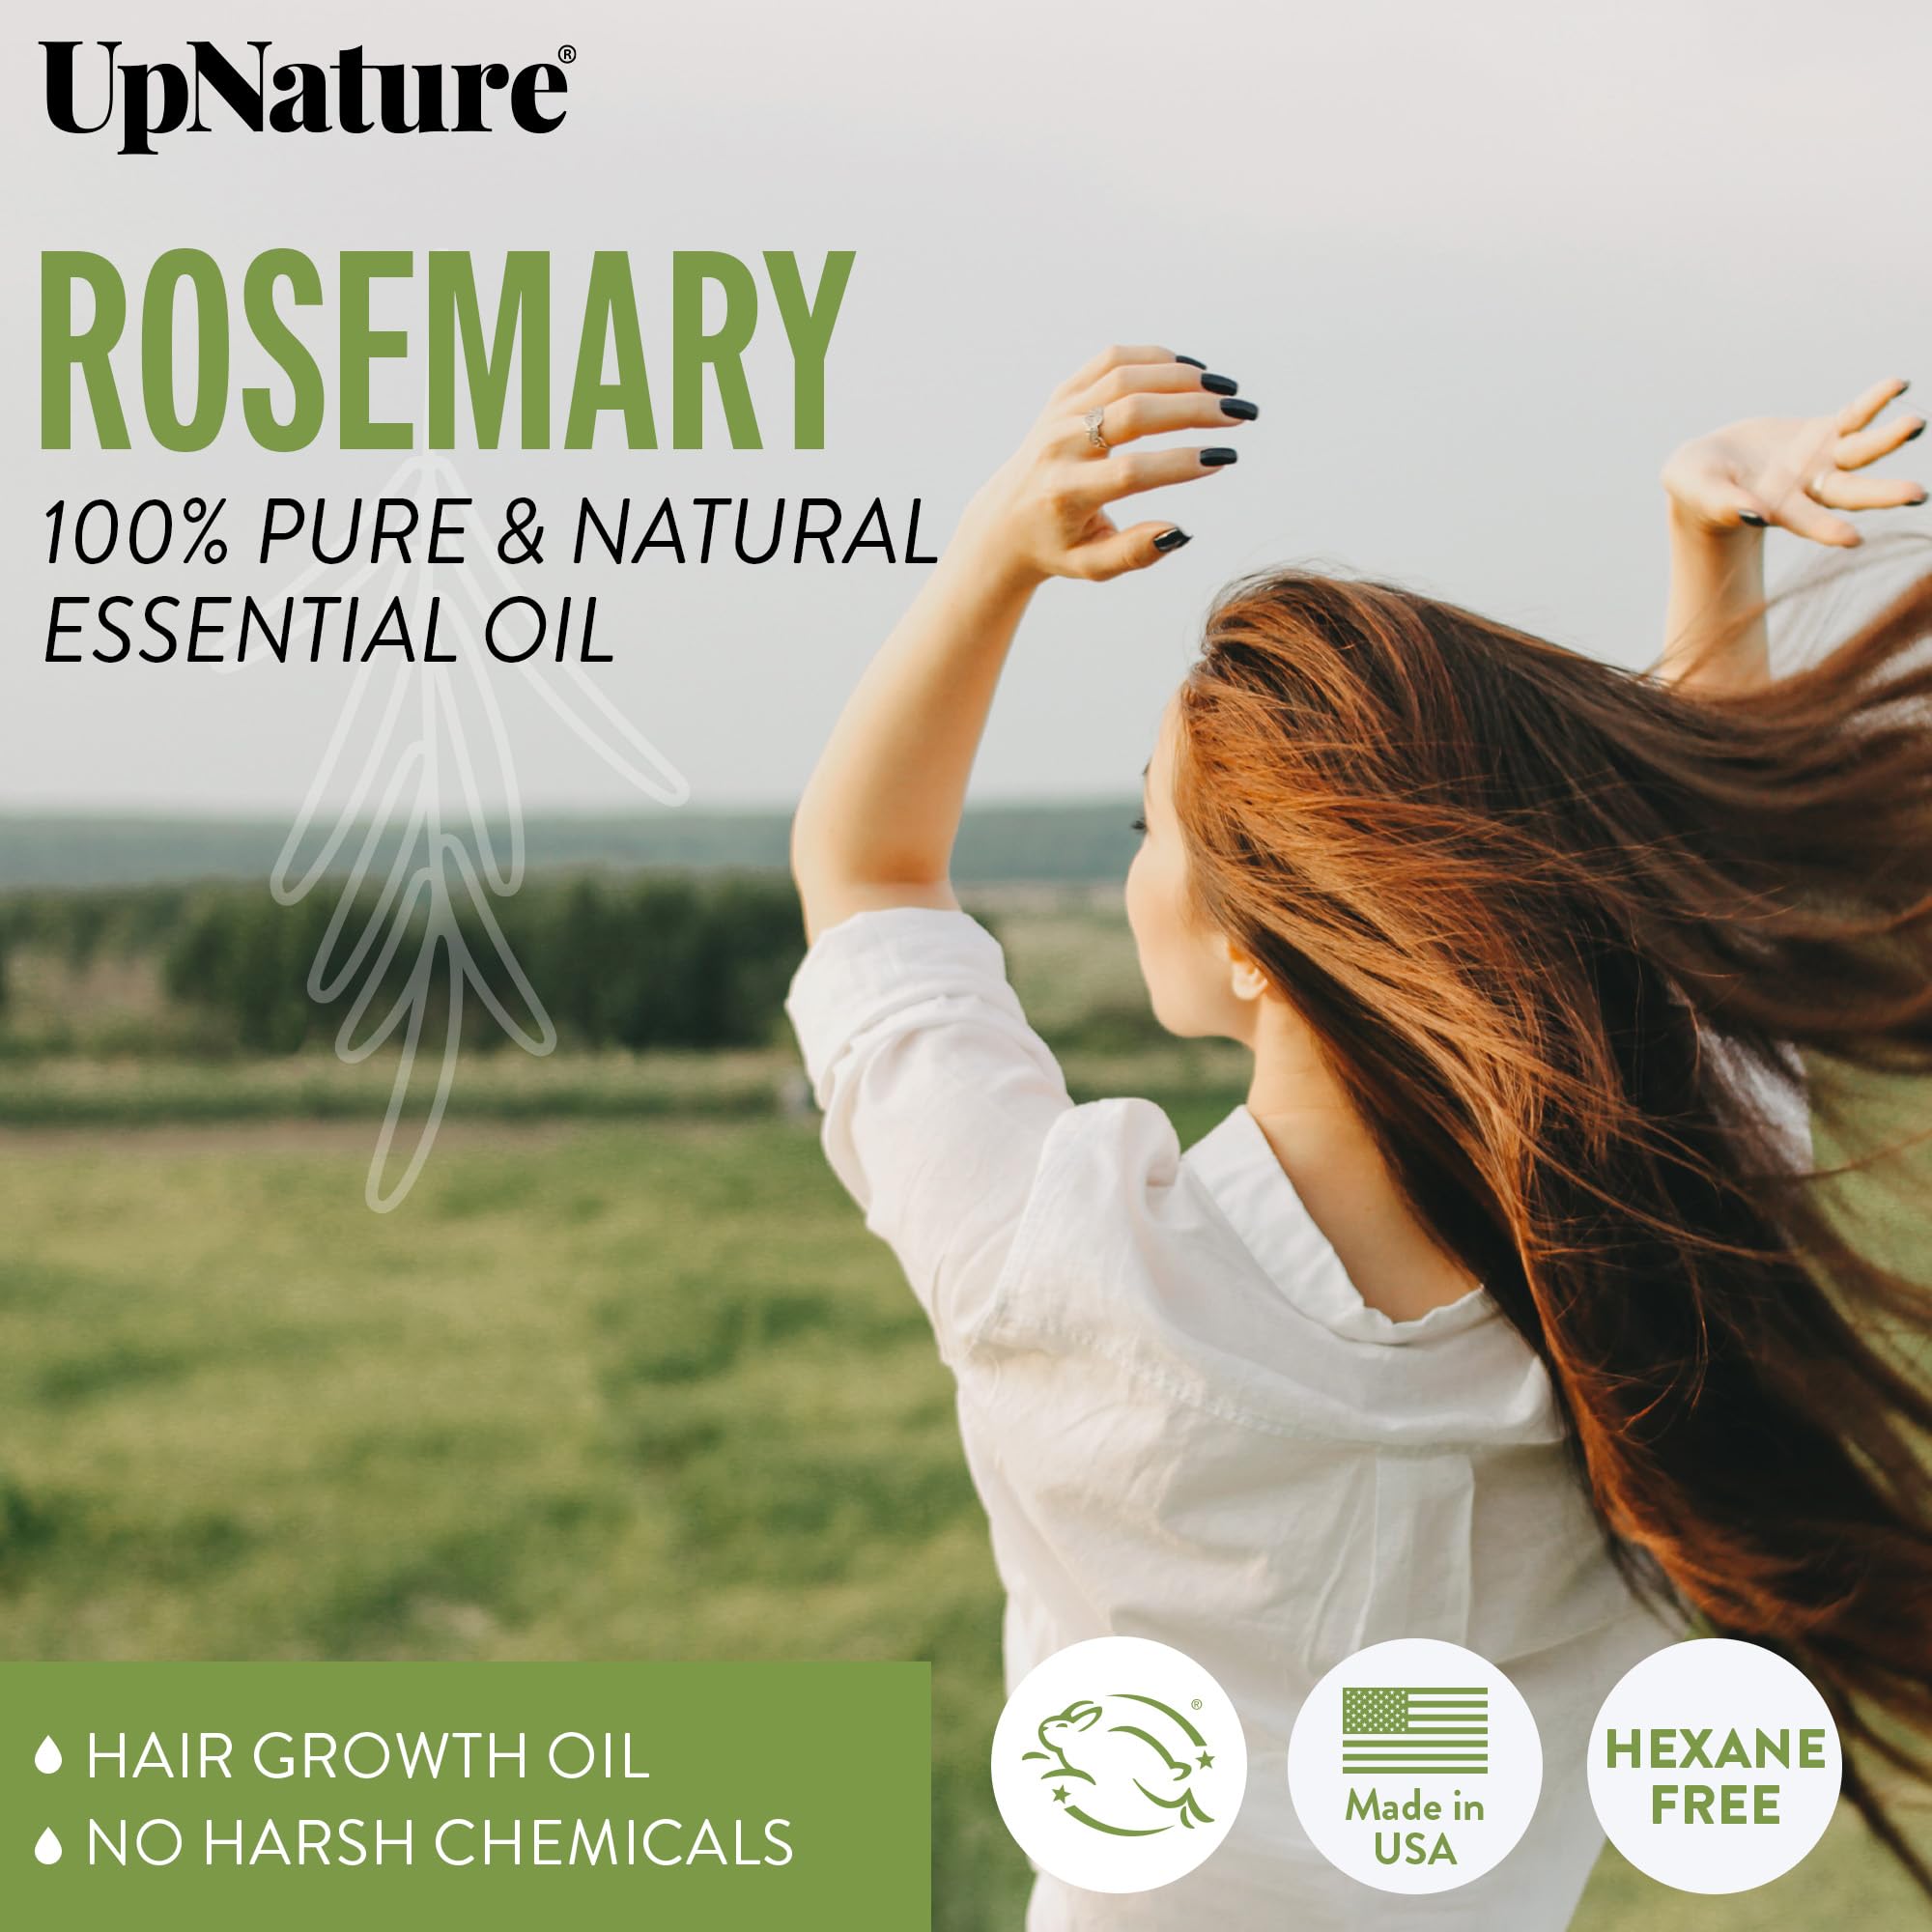 UpNature Rosemary Essential Oil for Hair Growth   100% Pure & Natural Rosemary Oil for Hair Growth, Nourishing Scalp Strengthening Hair Oil - Stimulates Healthy Hair Growth, Skin & Nails, 2oz